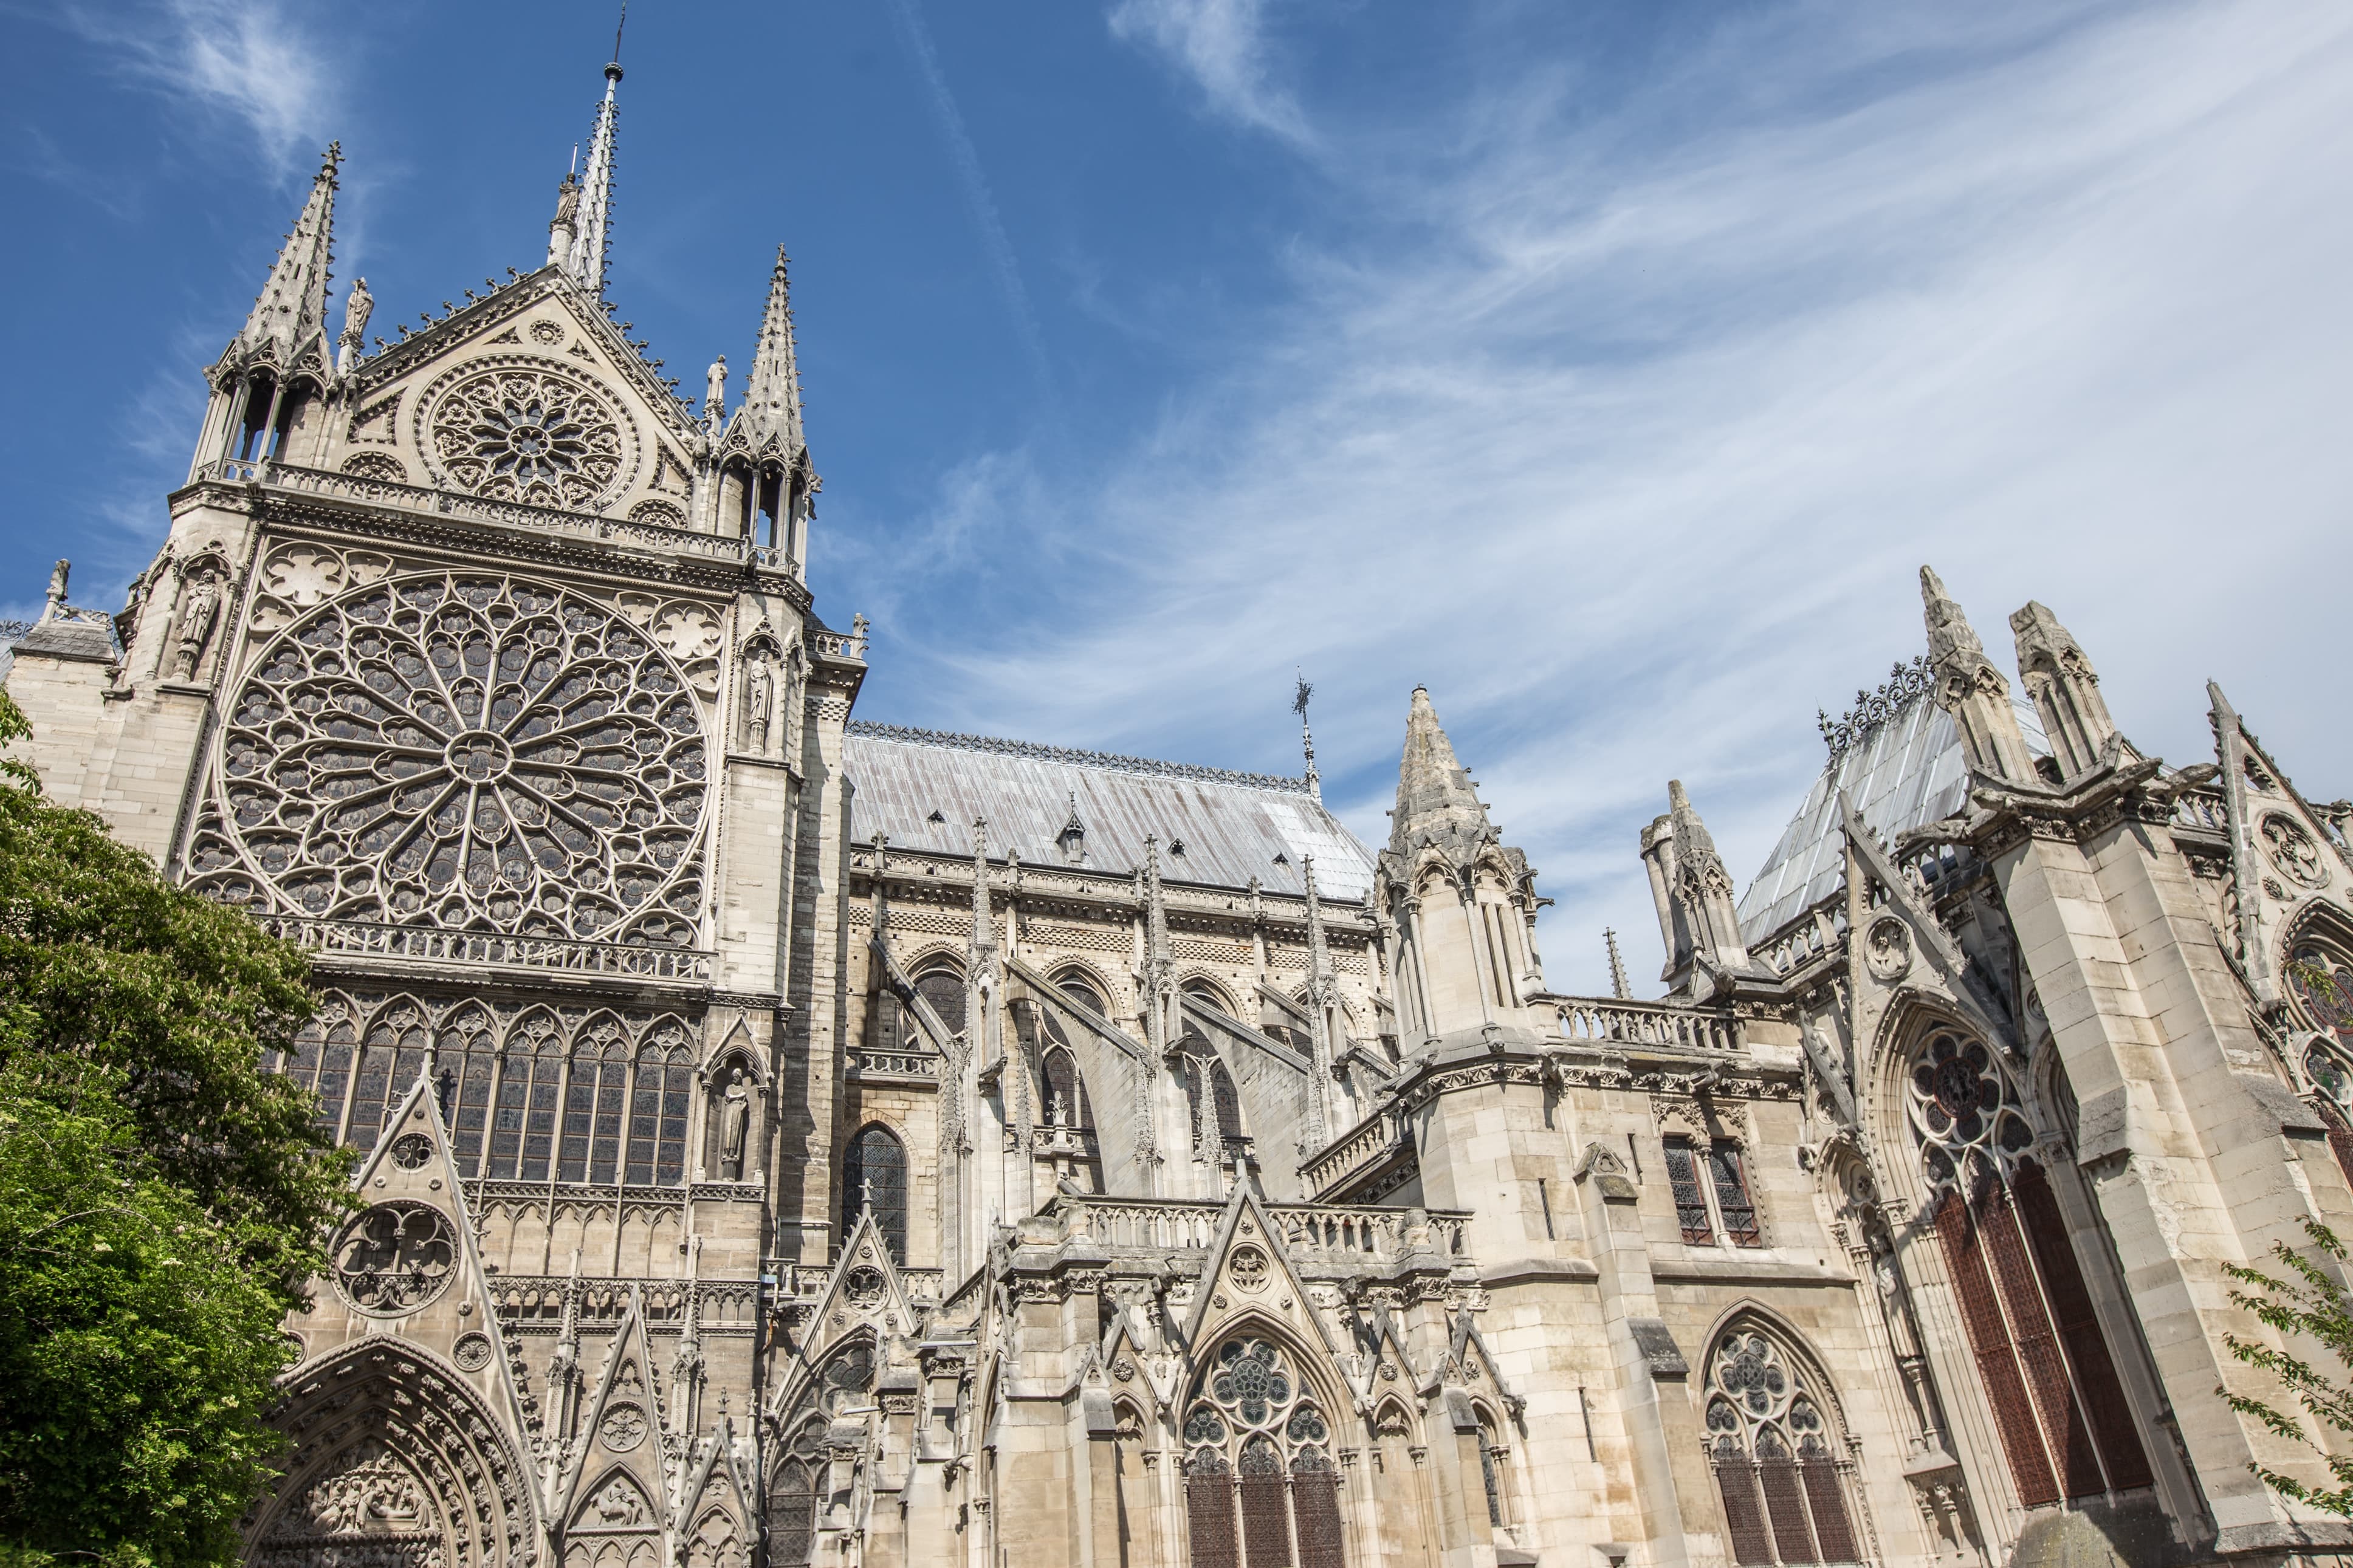 View of the side of Notre Dame cathedral on a sunny day.  Notre Dame looks large and imposing, filling the whole image.